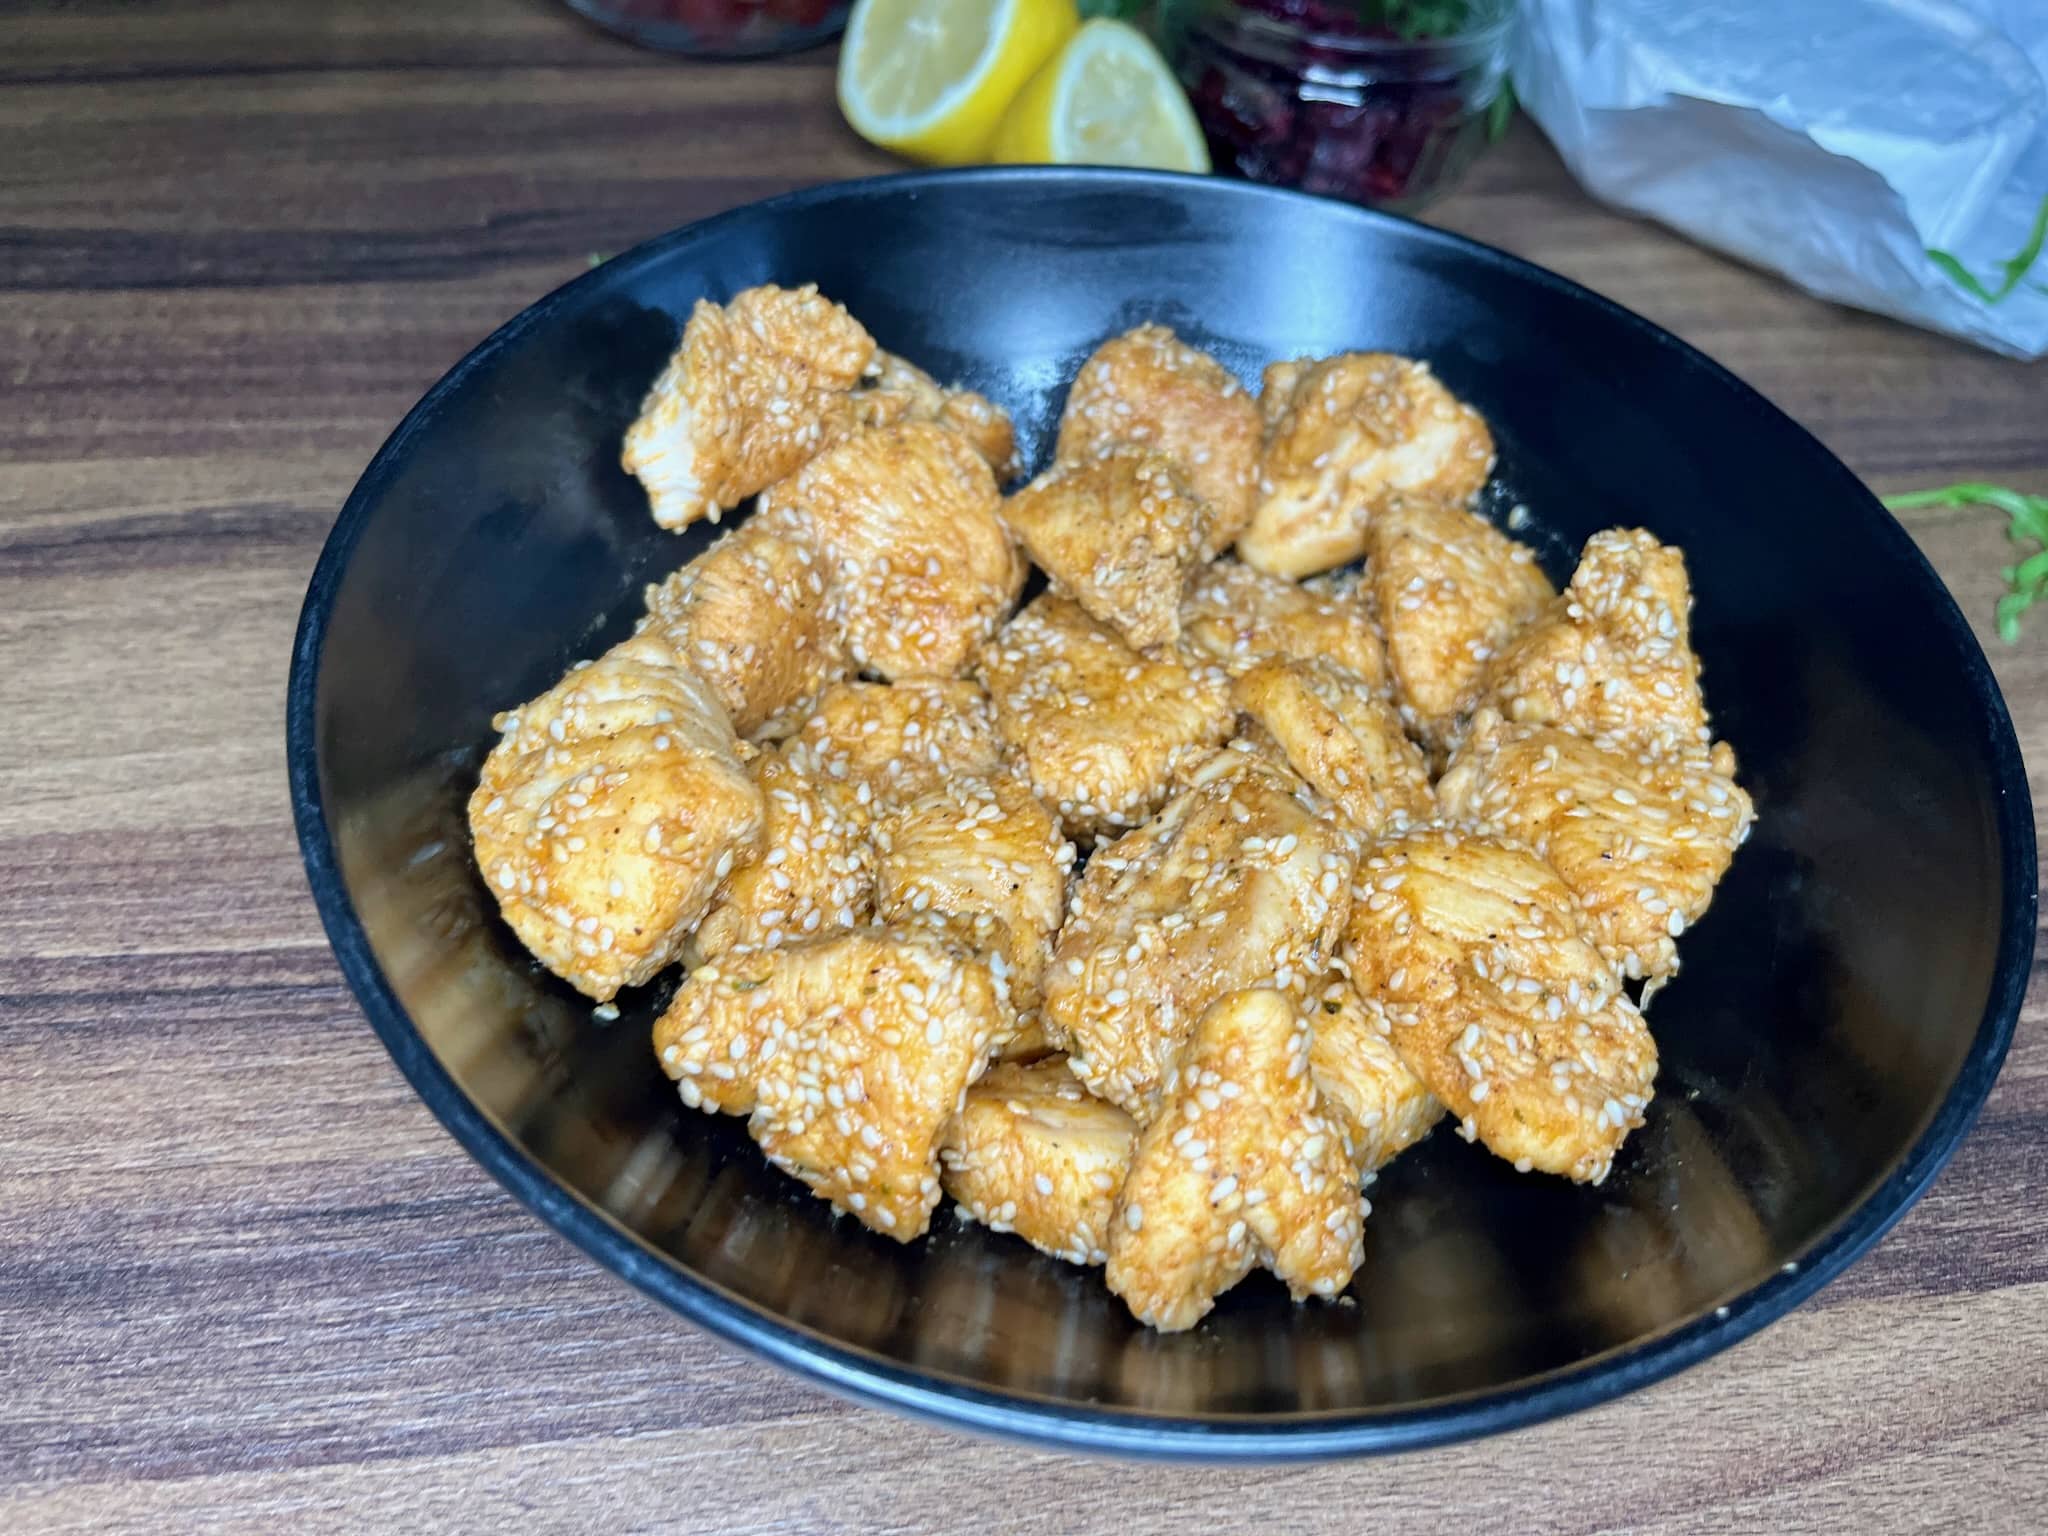 Fried chicken dice covered in sesame seeds